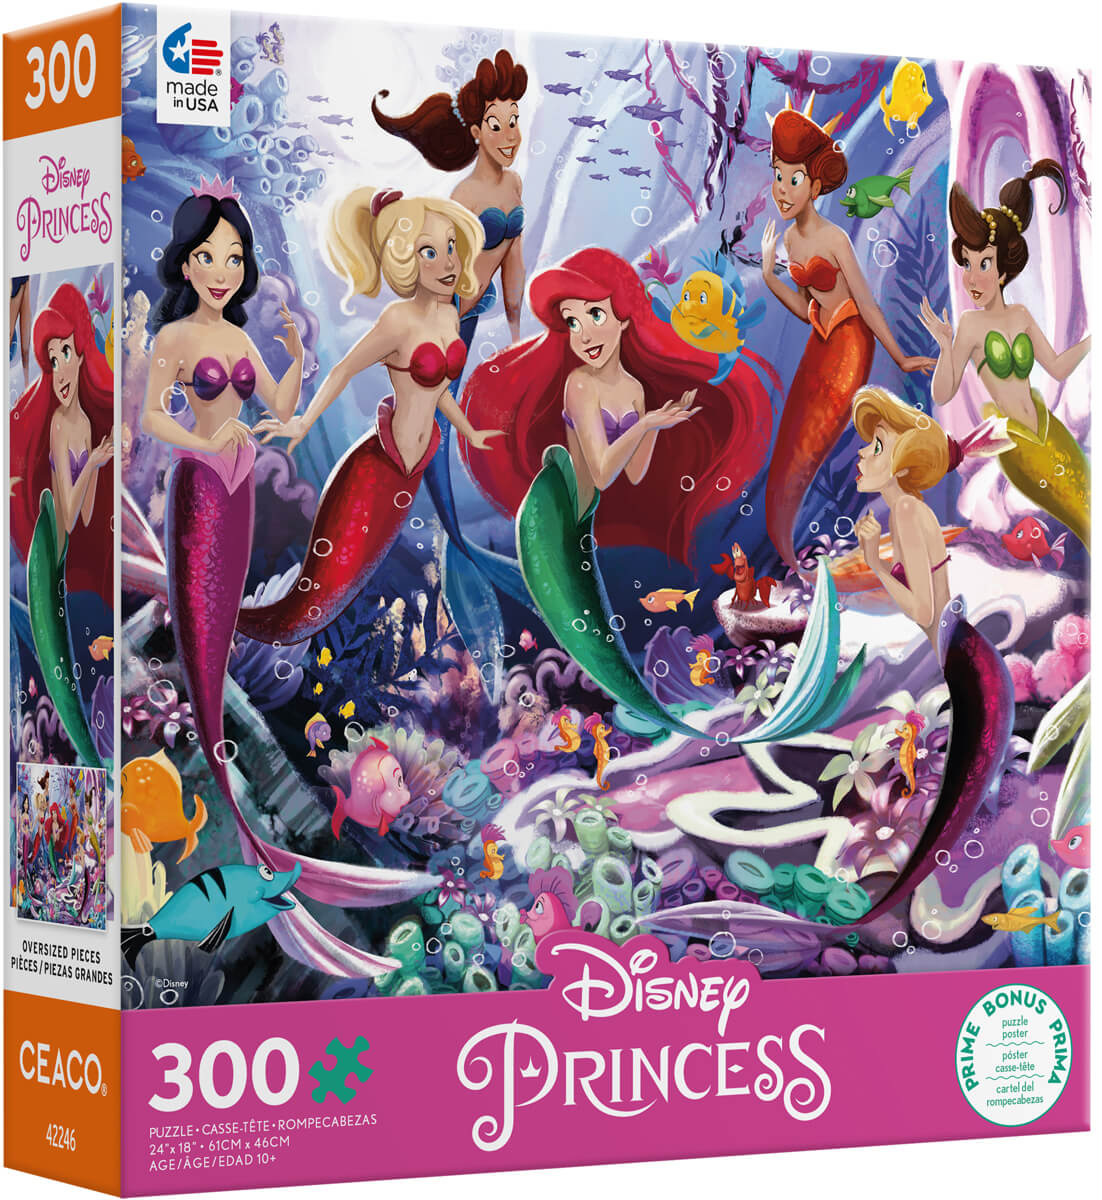 Ceaco Disney Princess Ariel and Her Sisters 300 Piece Jigsaw Puzzle